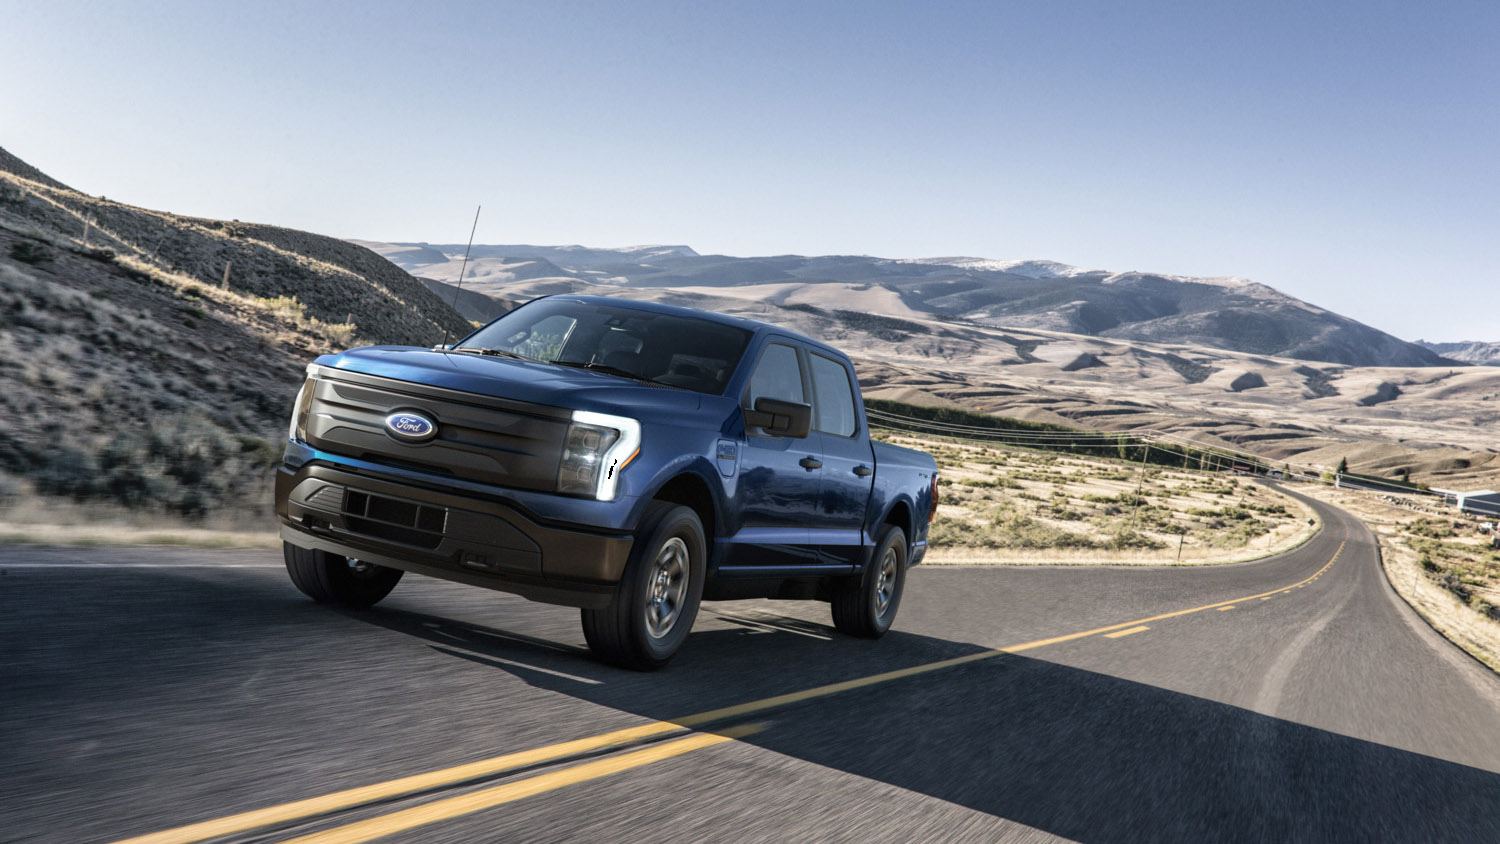 A 2022 F-150 Lightning Pro driving along an empty street, the 2022 F-150 Lightning Pro is the best value electric pickup truck